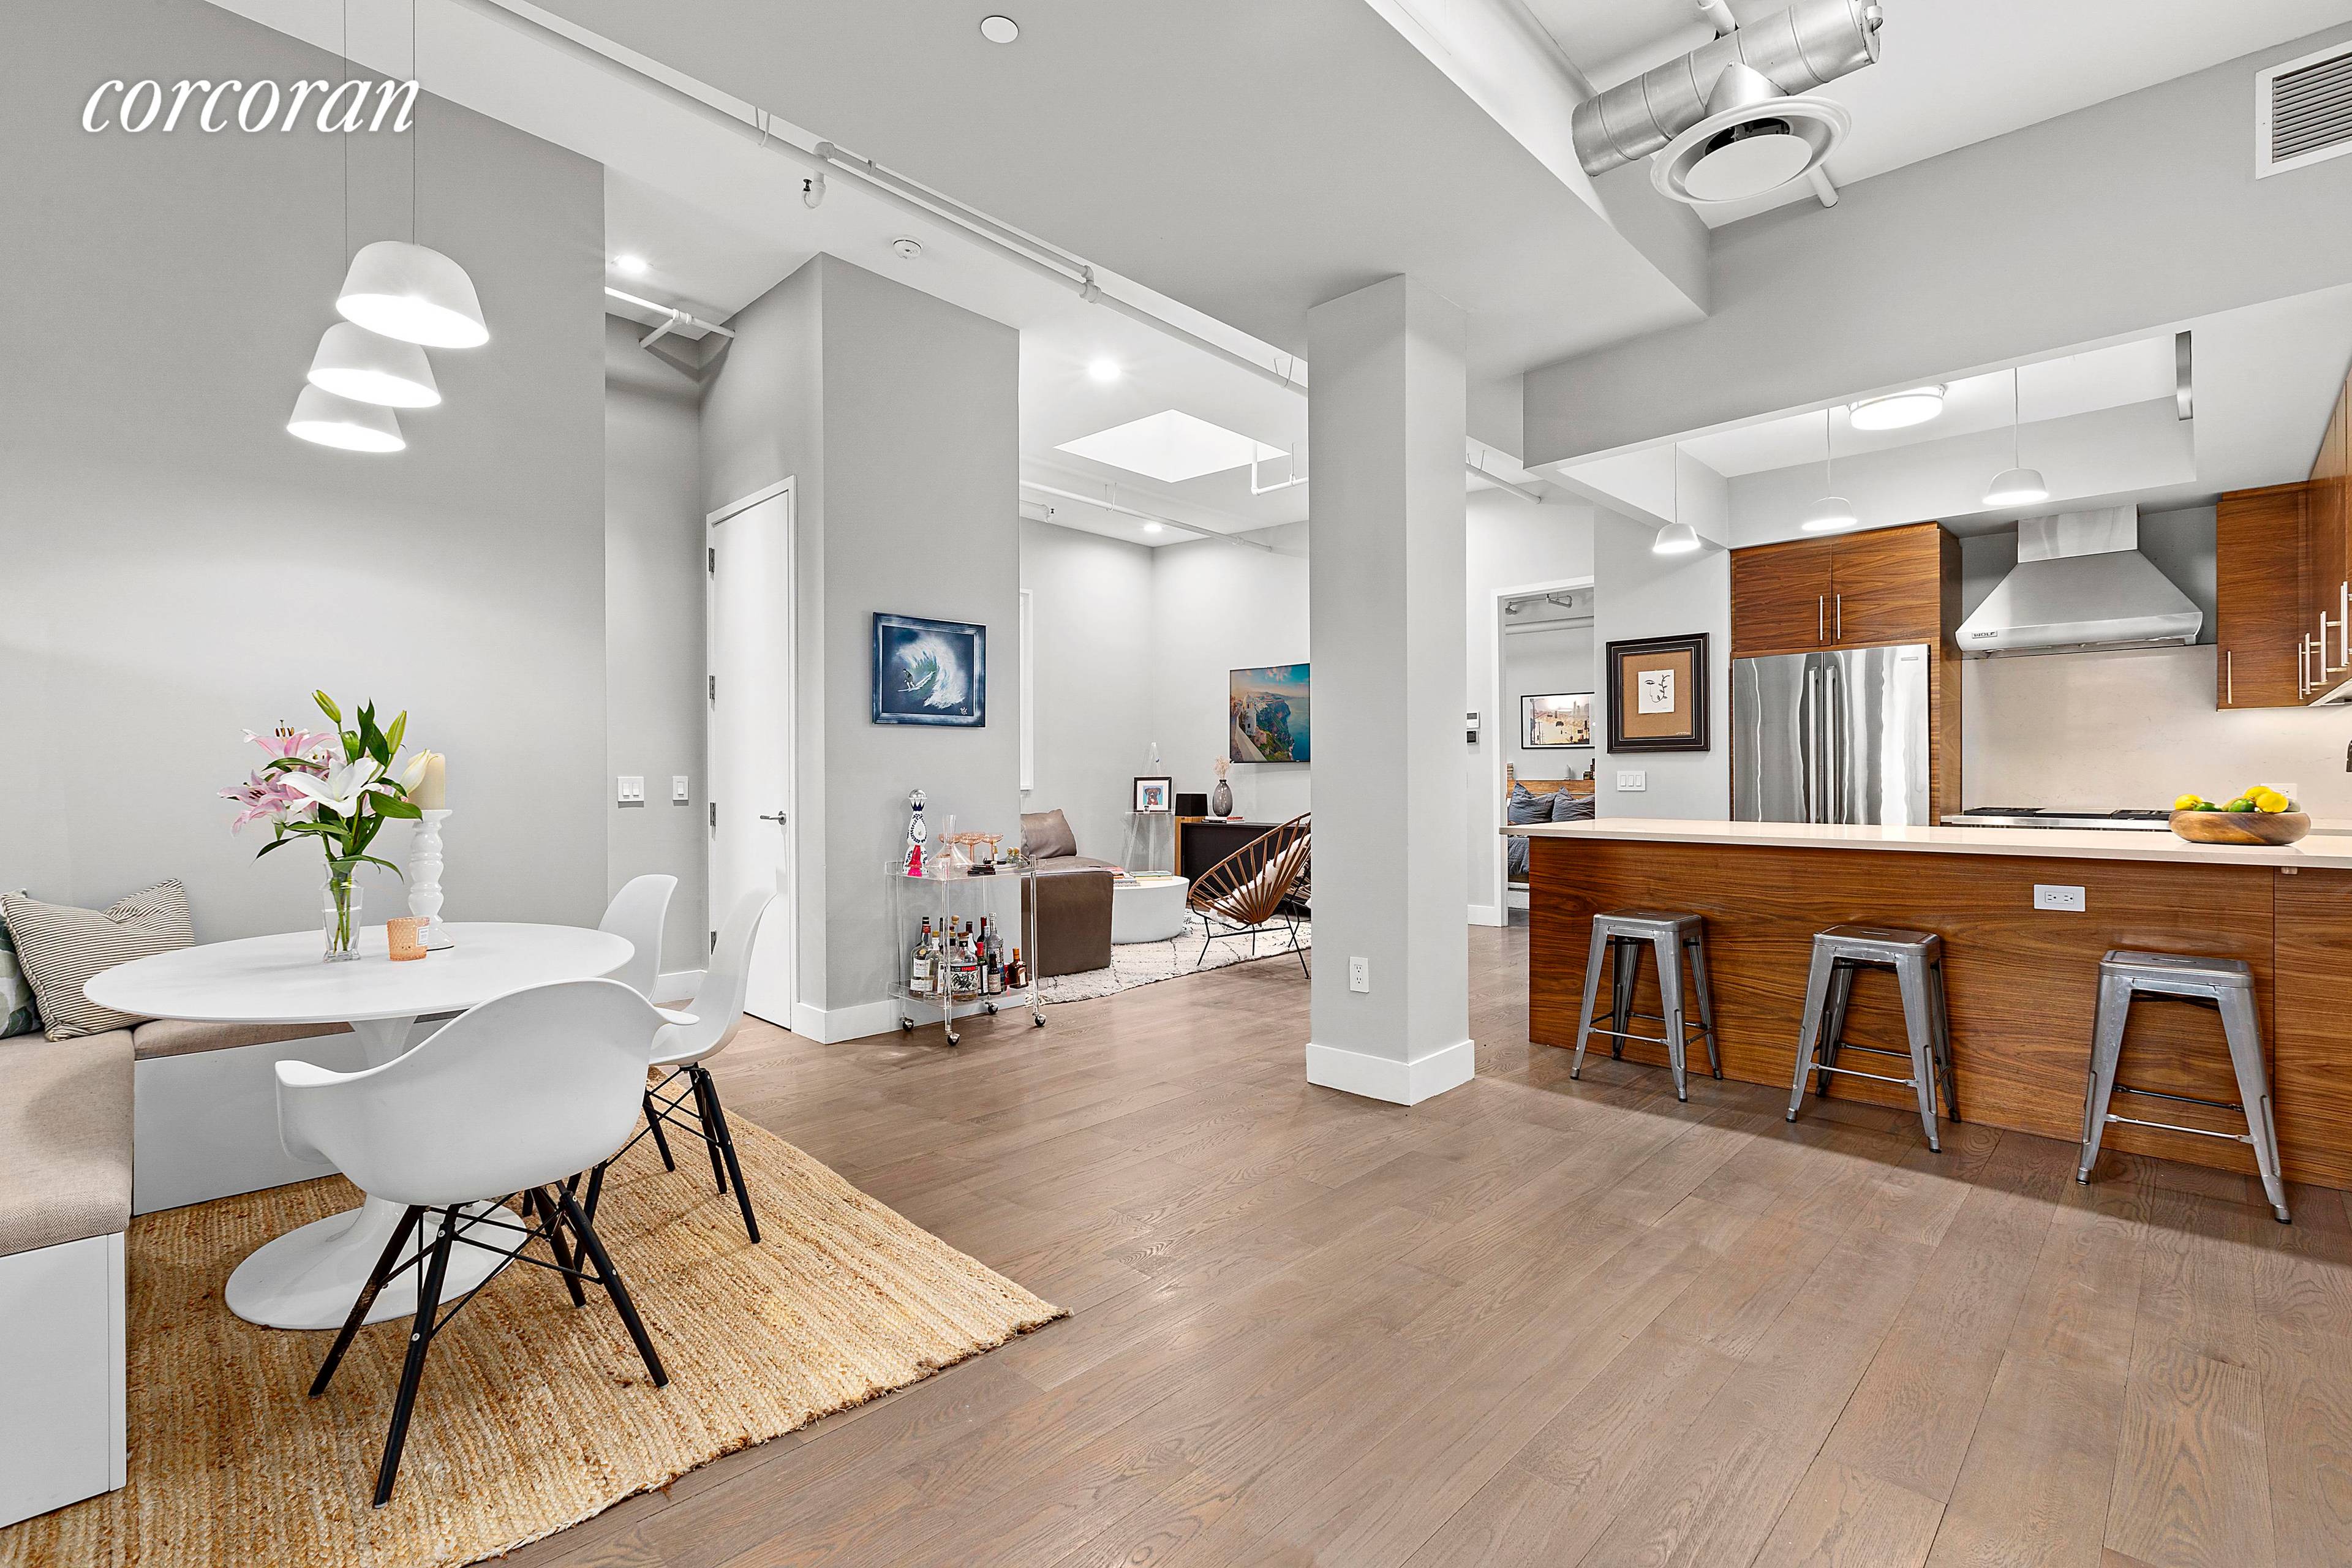 Welcome home to this stunning and unique convertible 3 bedroom Penthouse loft at 133 Mulberry Street.